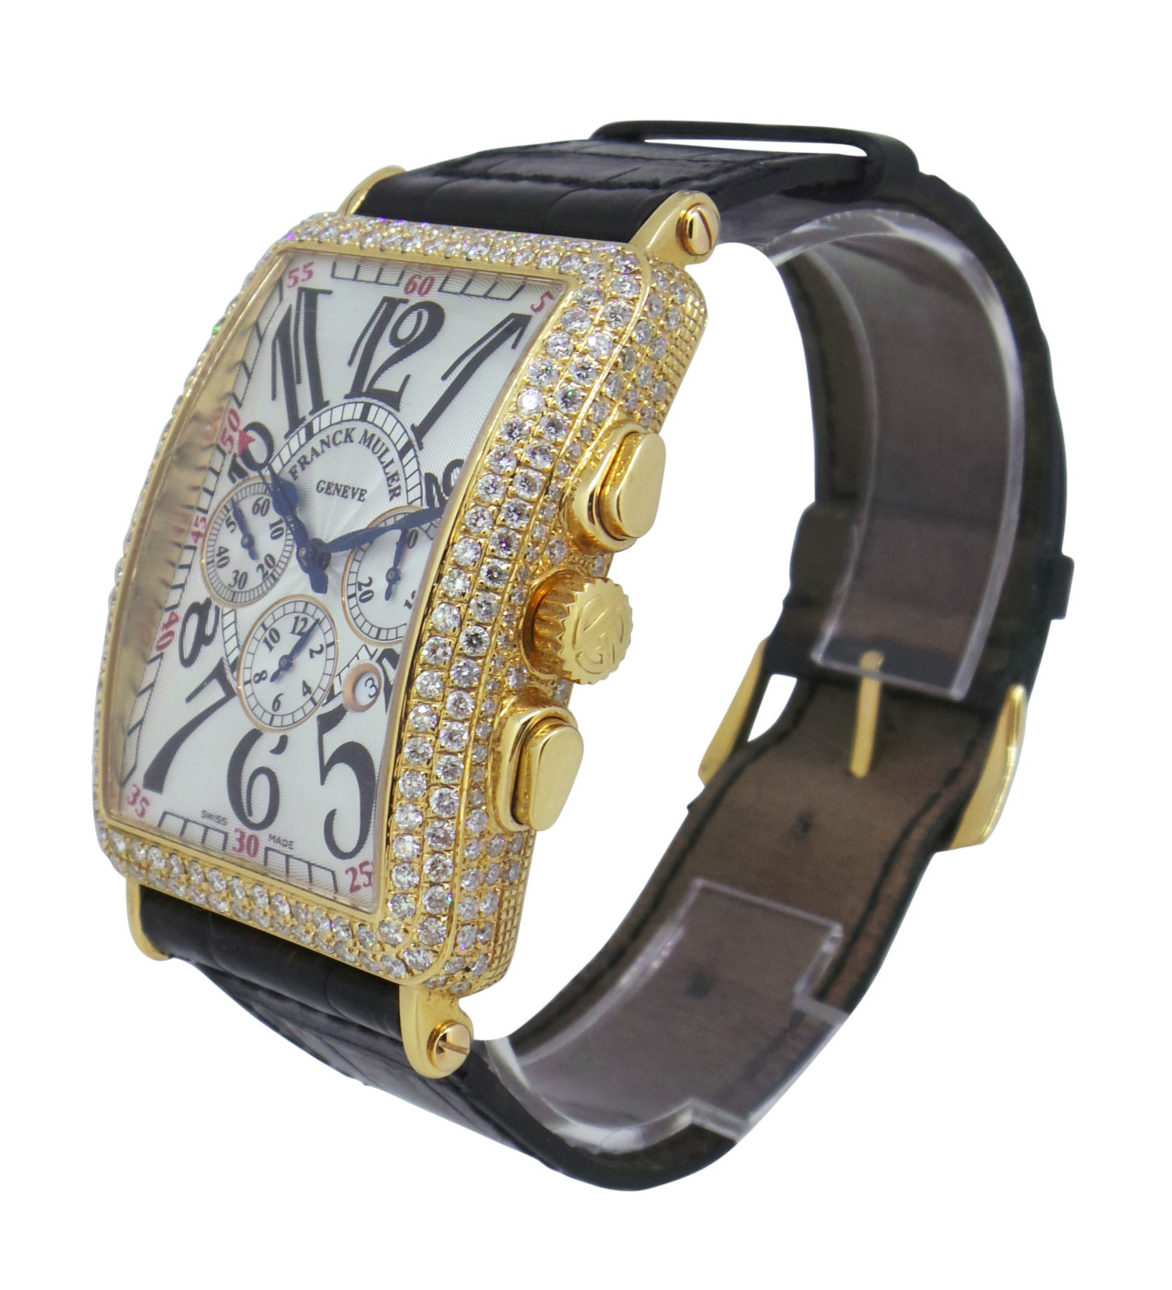 Franck muller model: long island model number: 95 movement type: eta 2094 automatic (chronograph) bracelet: black leather strap case: 18ct yellow gold, all diamond set dial: silver bezel size: 32x45mm box: no papers: no estimated nrp: £11,100.